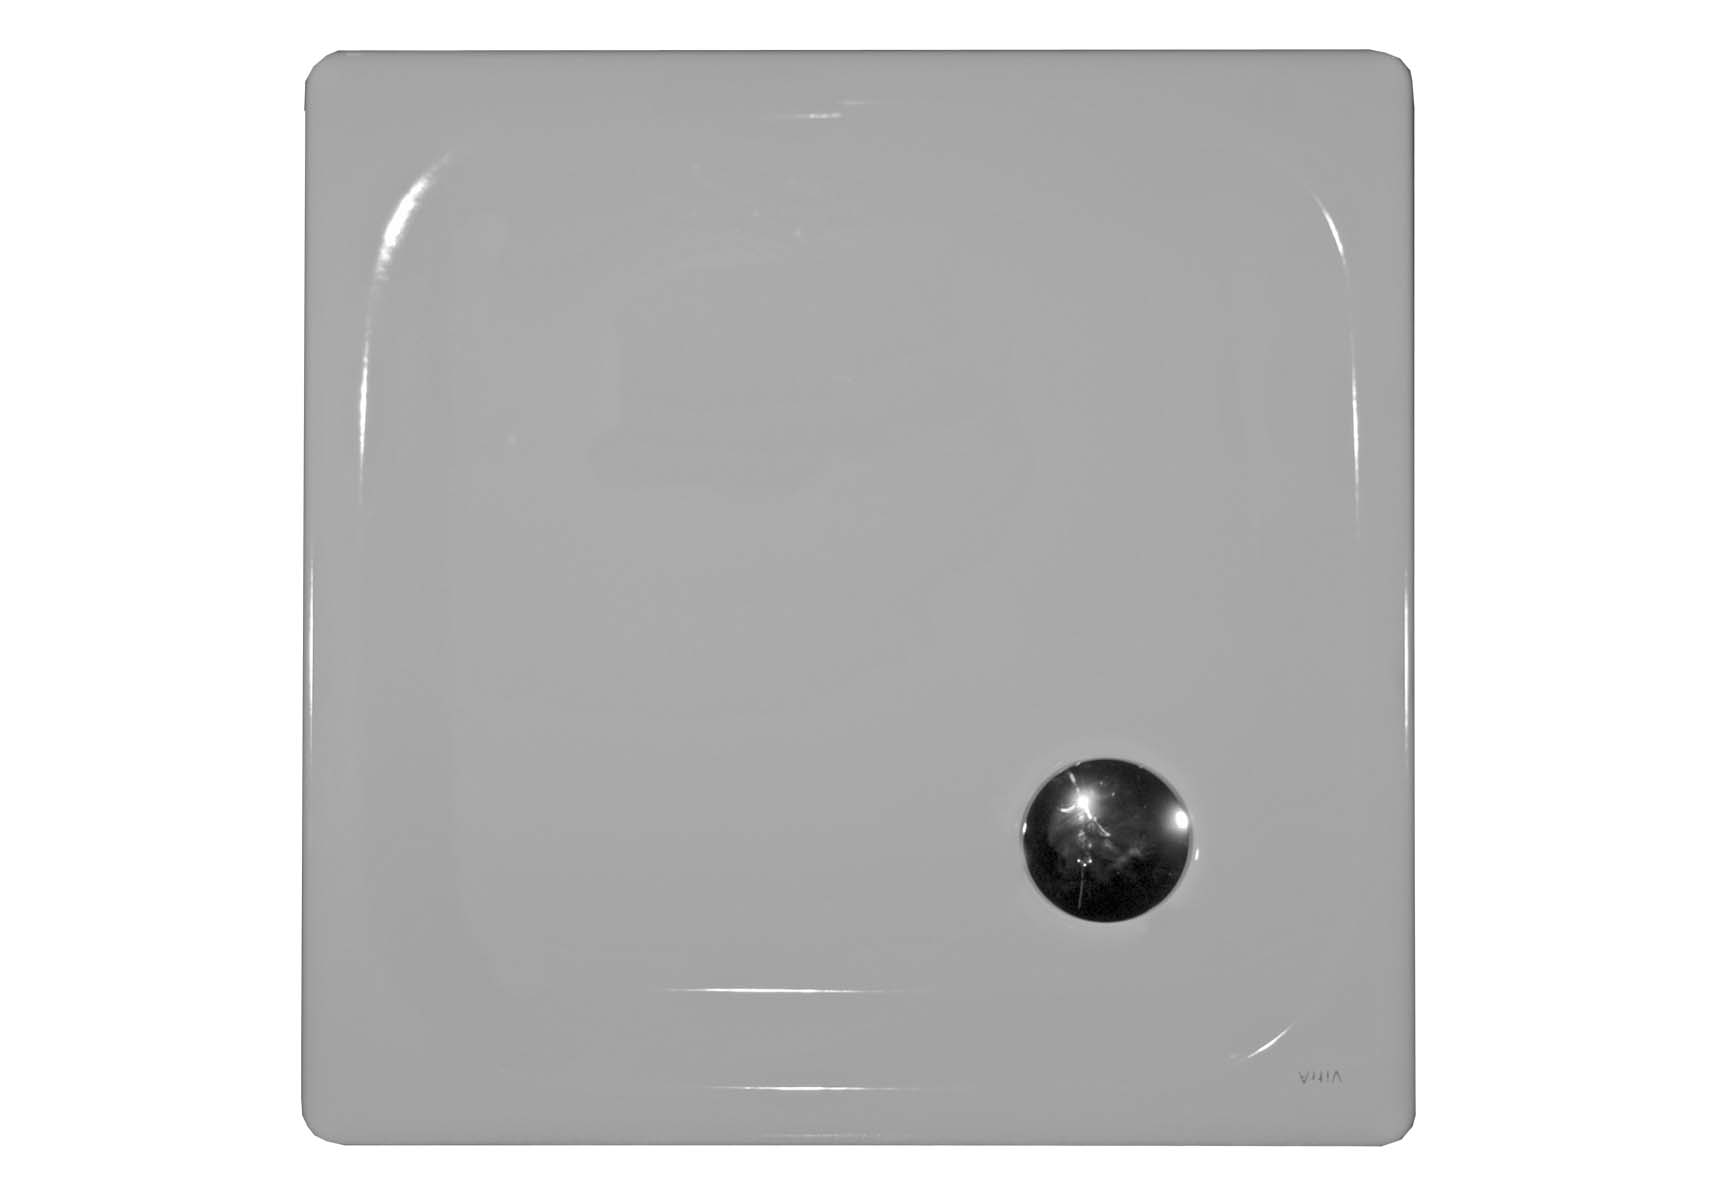 Generic Square 90x90 cm Steel Shower Tray, 3.5 Mm, H:2.5 cm, 90 Mm Waste, Sound Proofing Pad